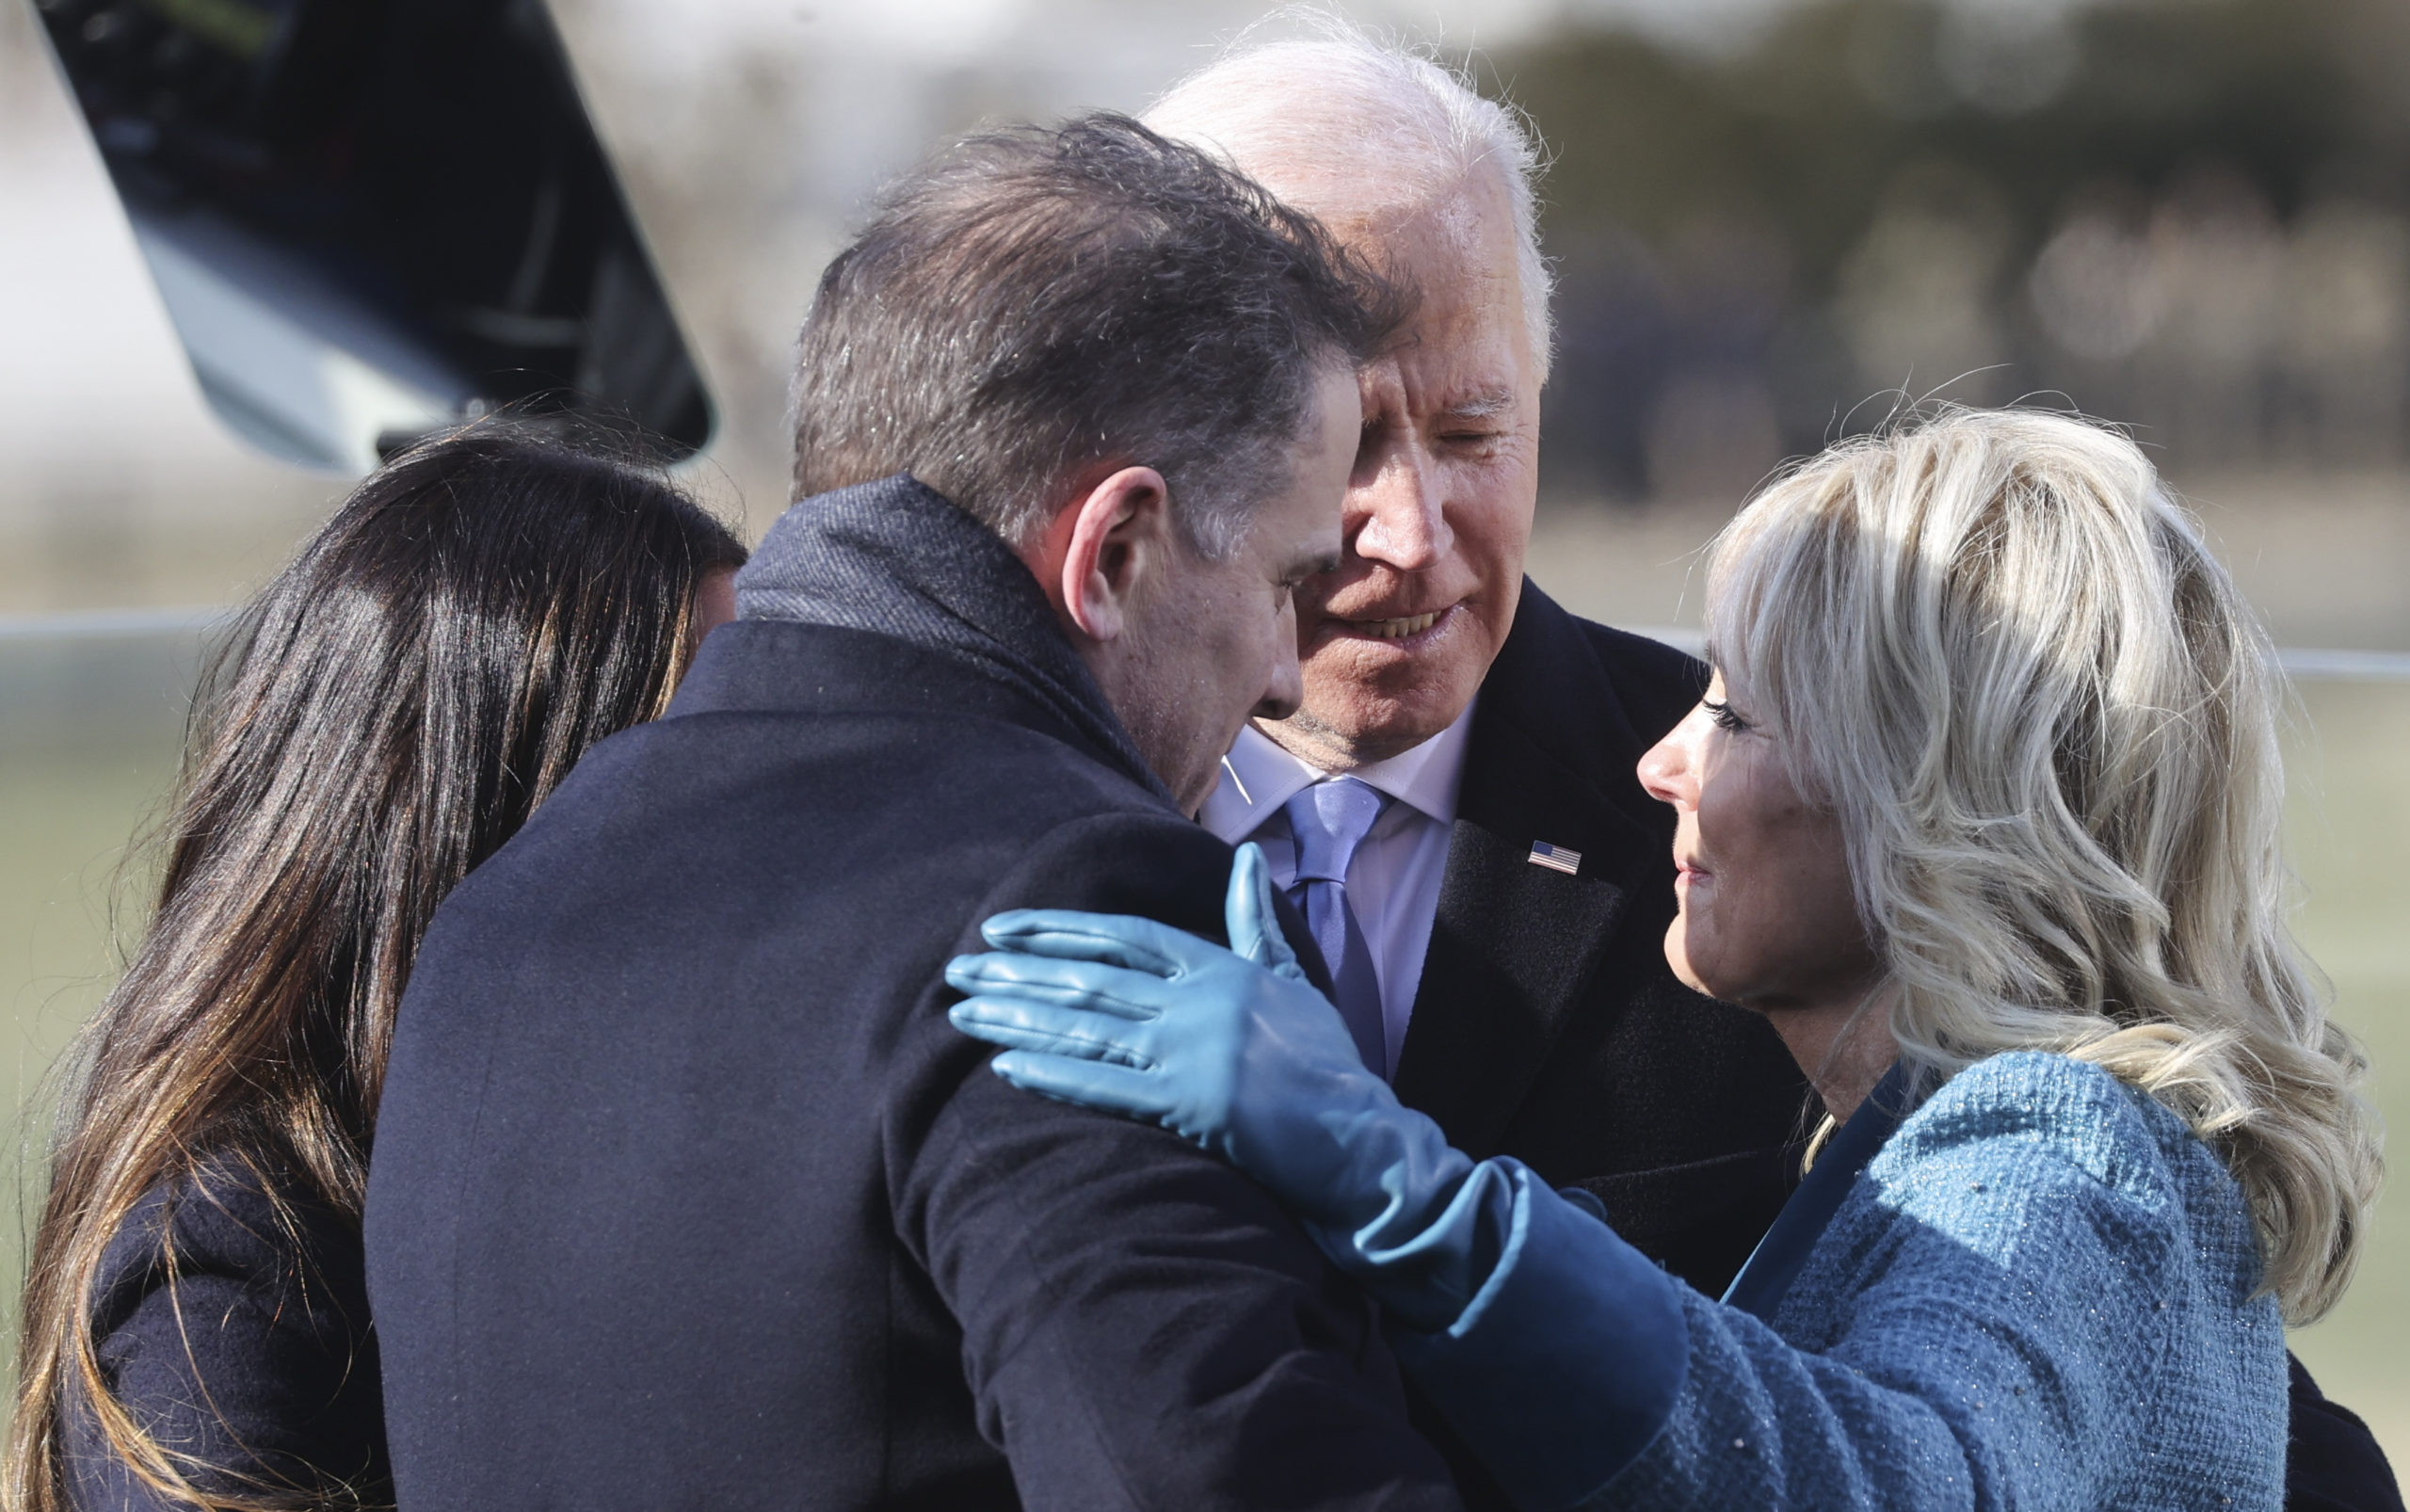 U.S. President Joe Biden embraces his family after he was sworn in as the 46th President of the United States during his inauguration on the West Front of the U.S. Capitol on January 20, 2021 in Washington, DC. During today's inauguration ceremony Biden becomes the 46th president of the United States. (Photo by Jonathan Ernst-Pool/Getty Images)